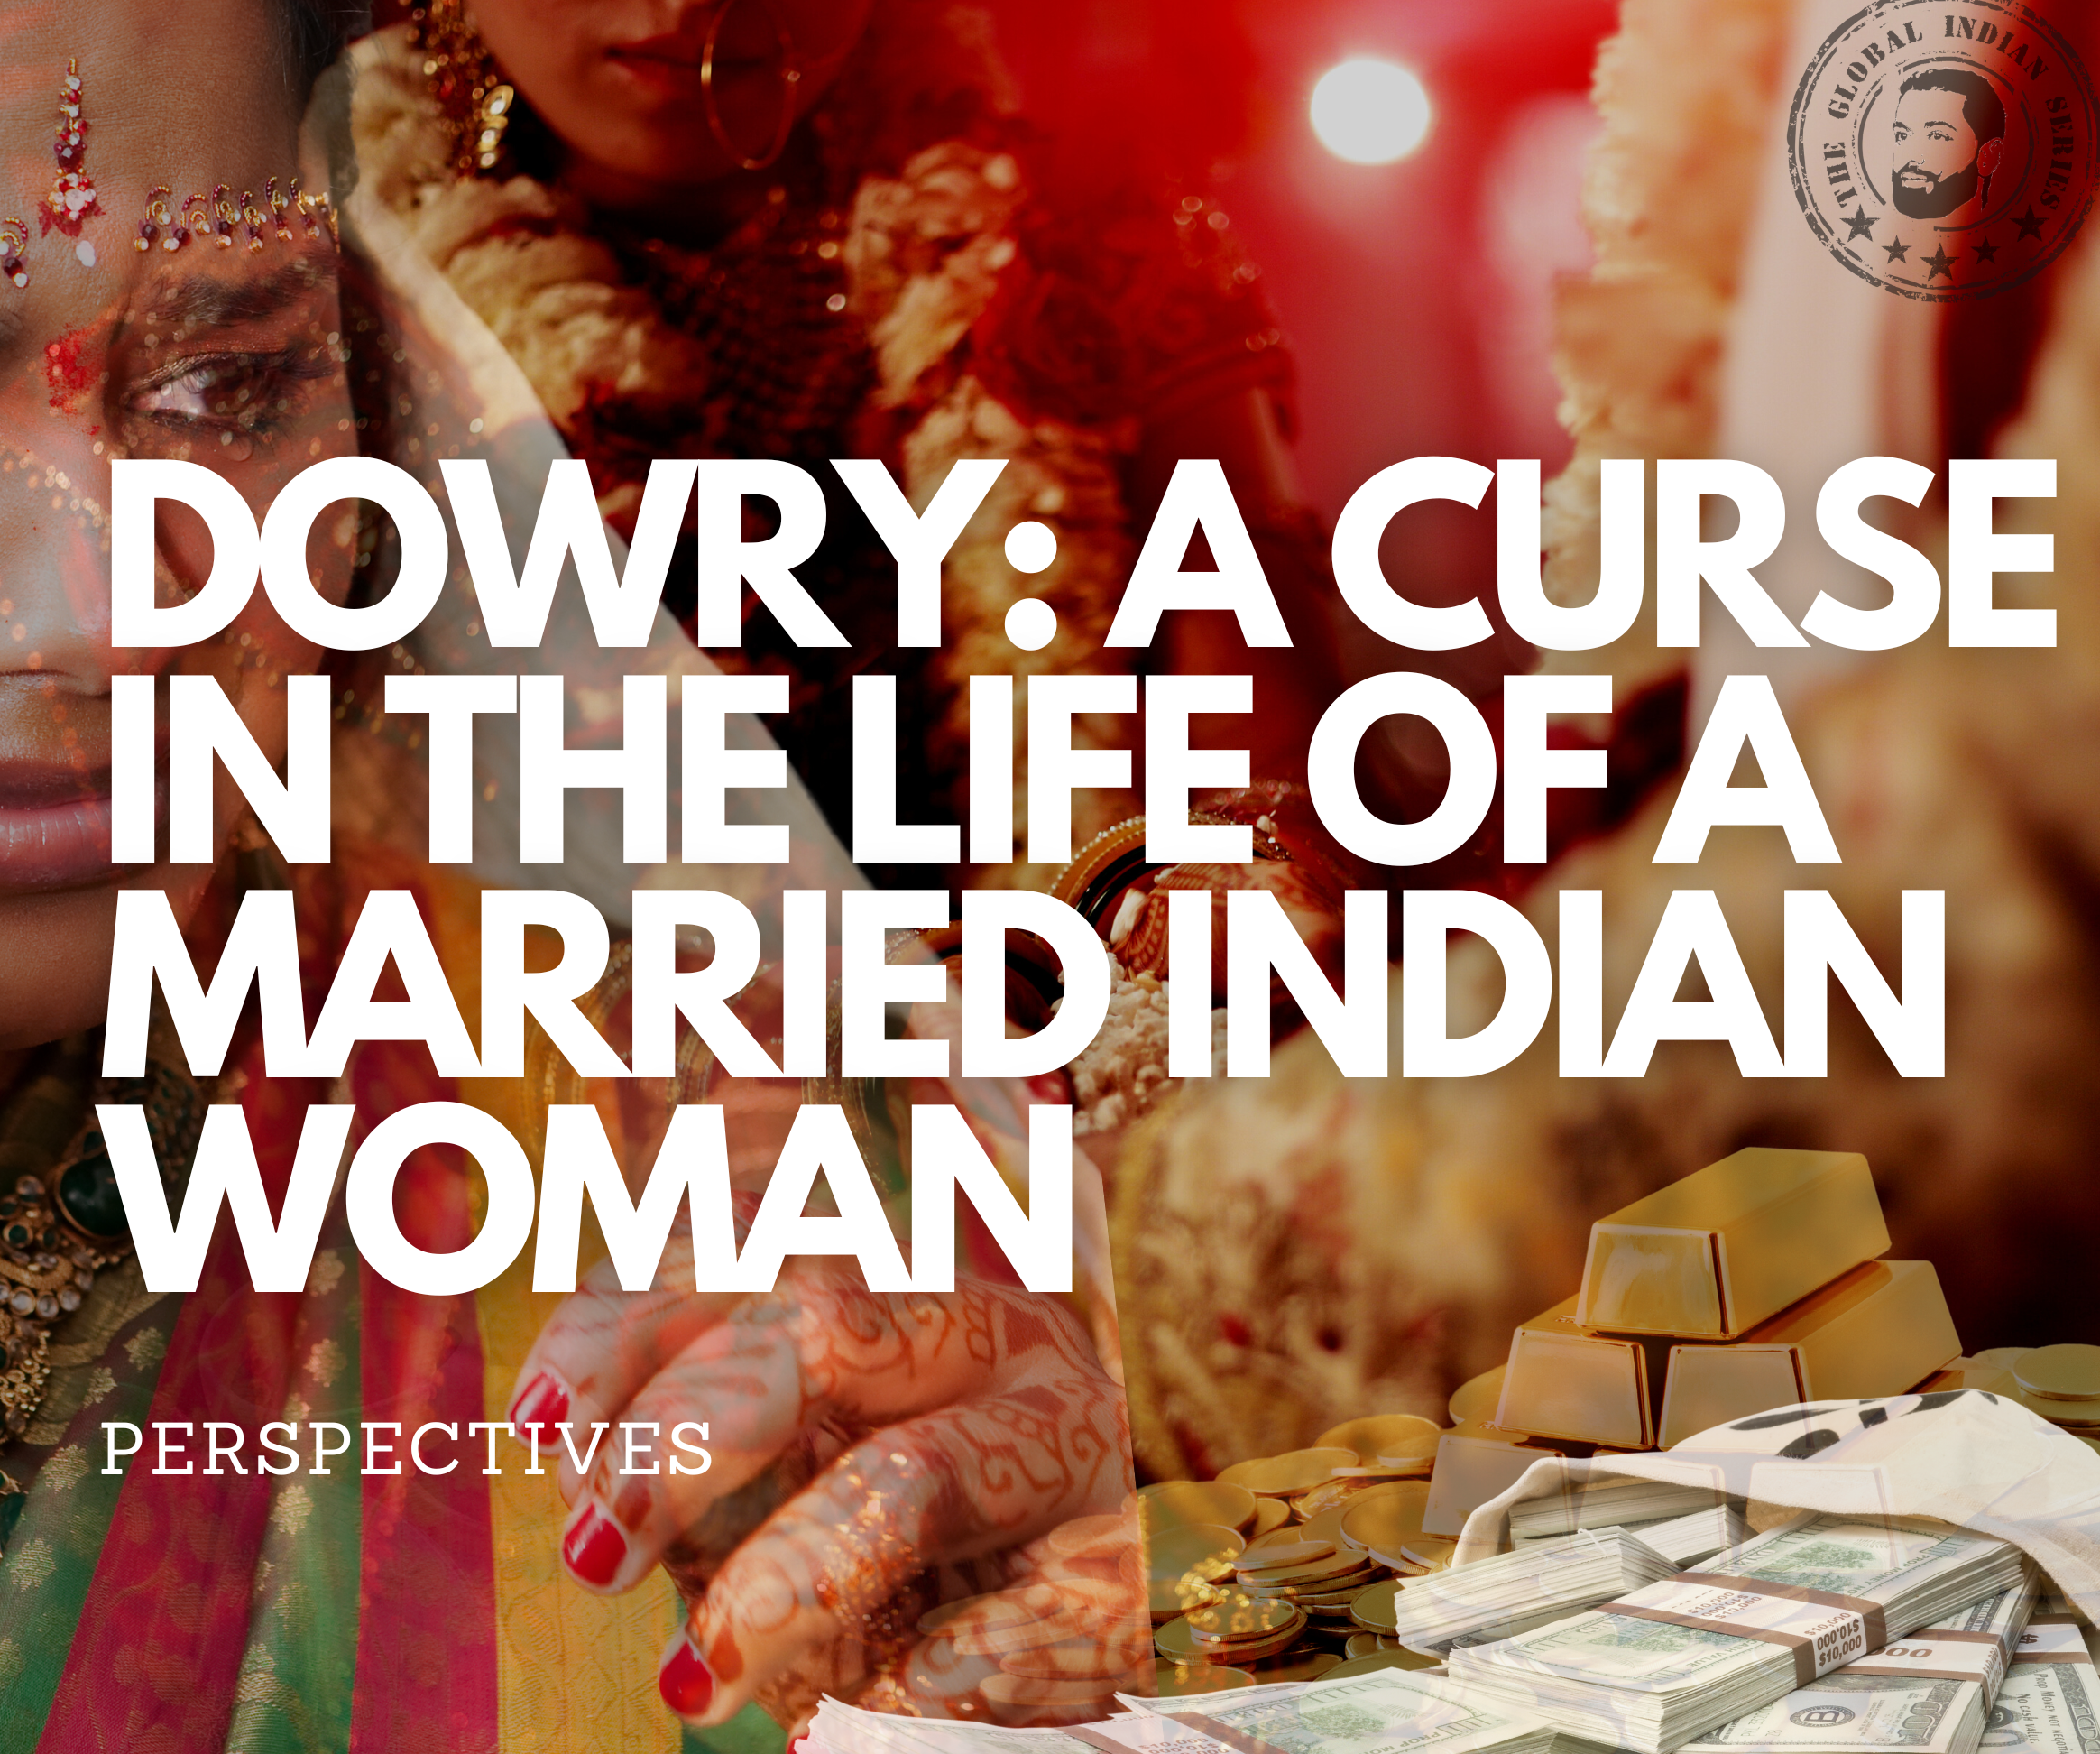 Dowry: A curse in the life of an married Indian woman